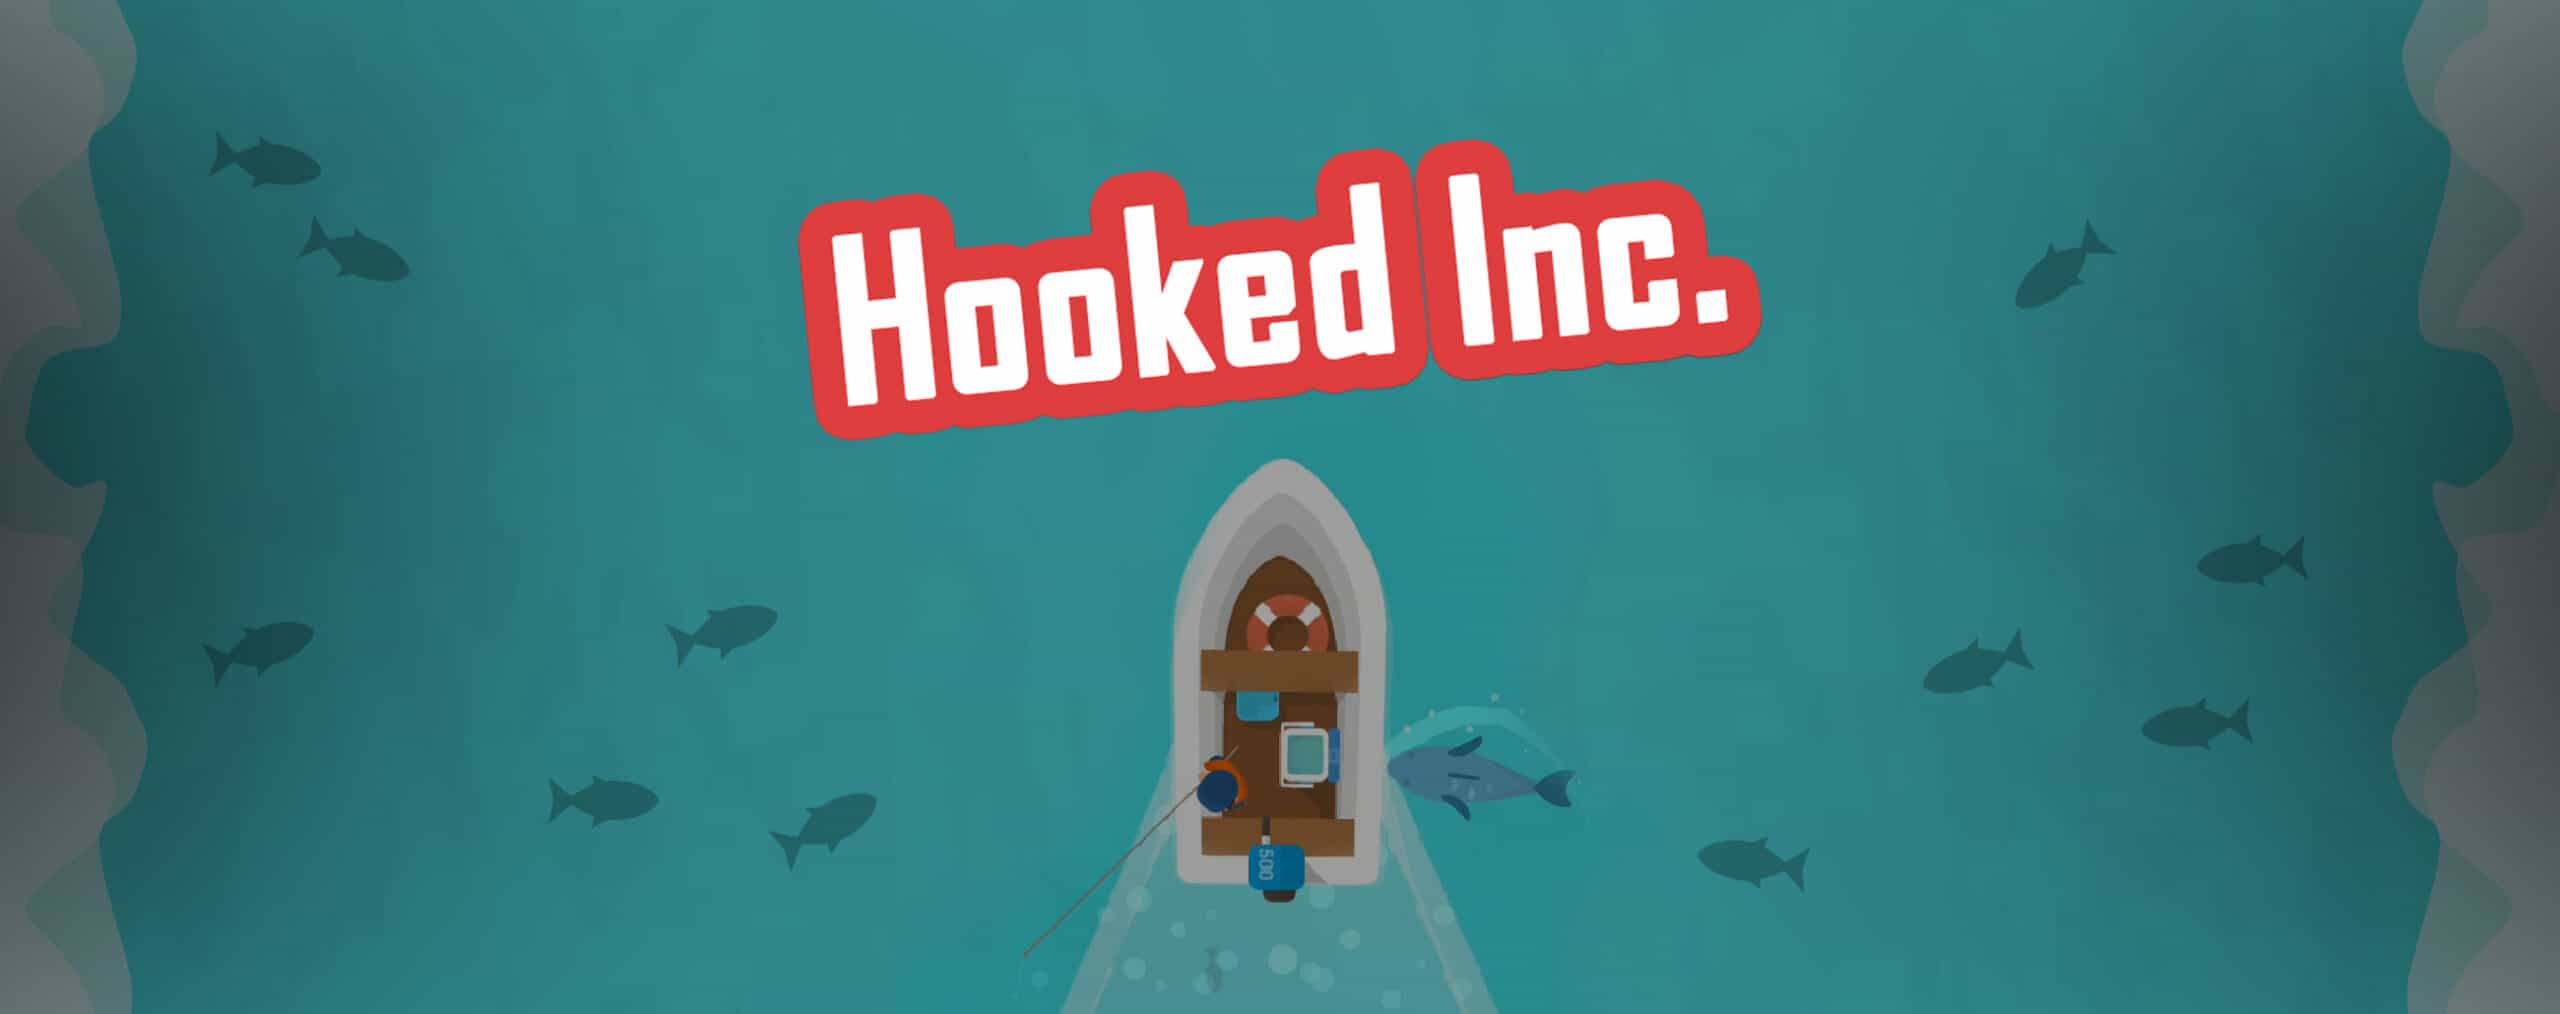 You're be hooked in Hooked Inc. Available on iOS and Android.